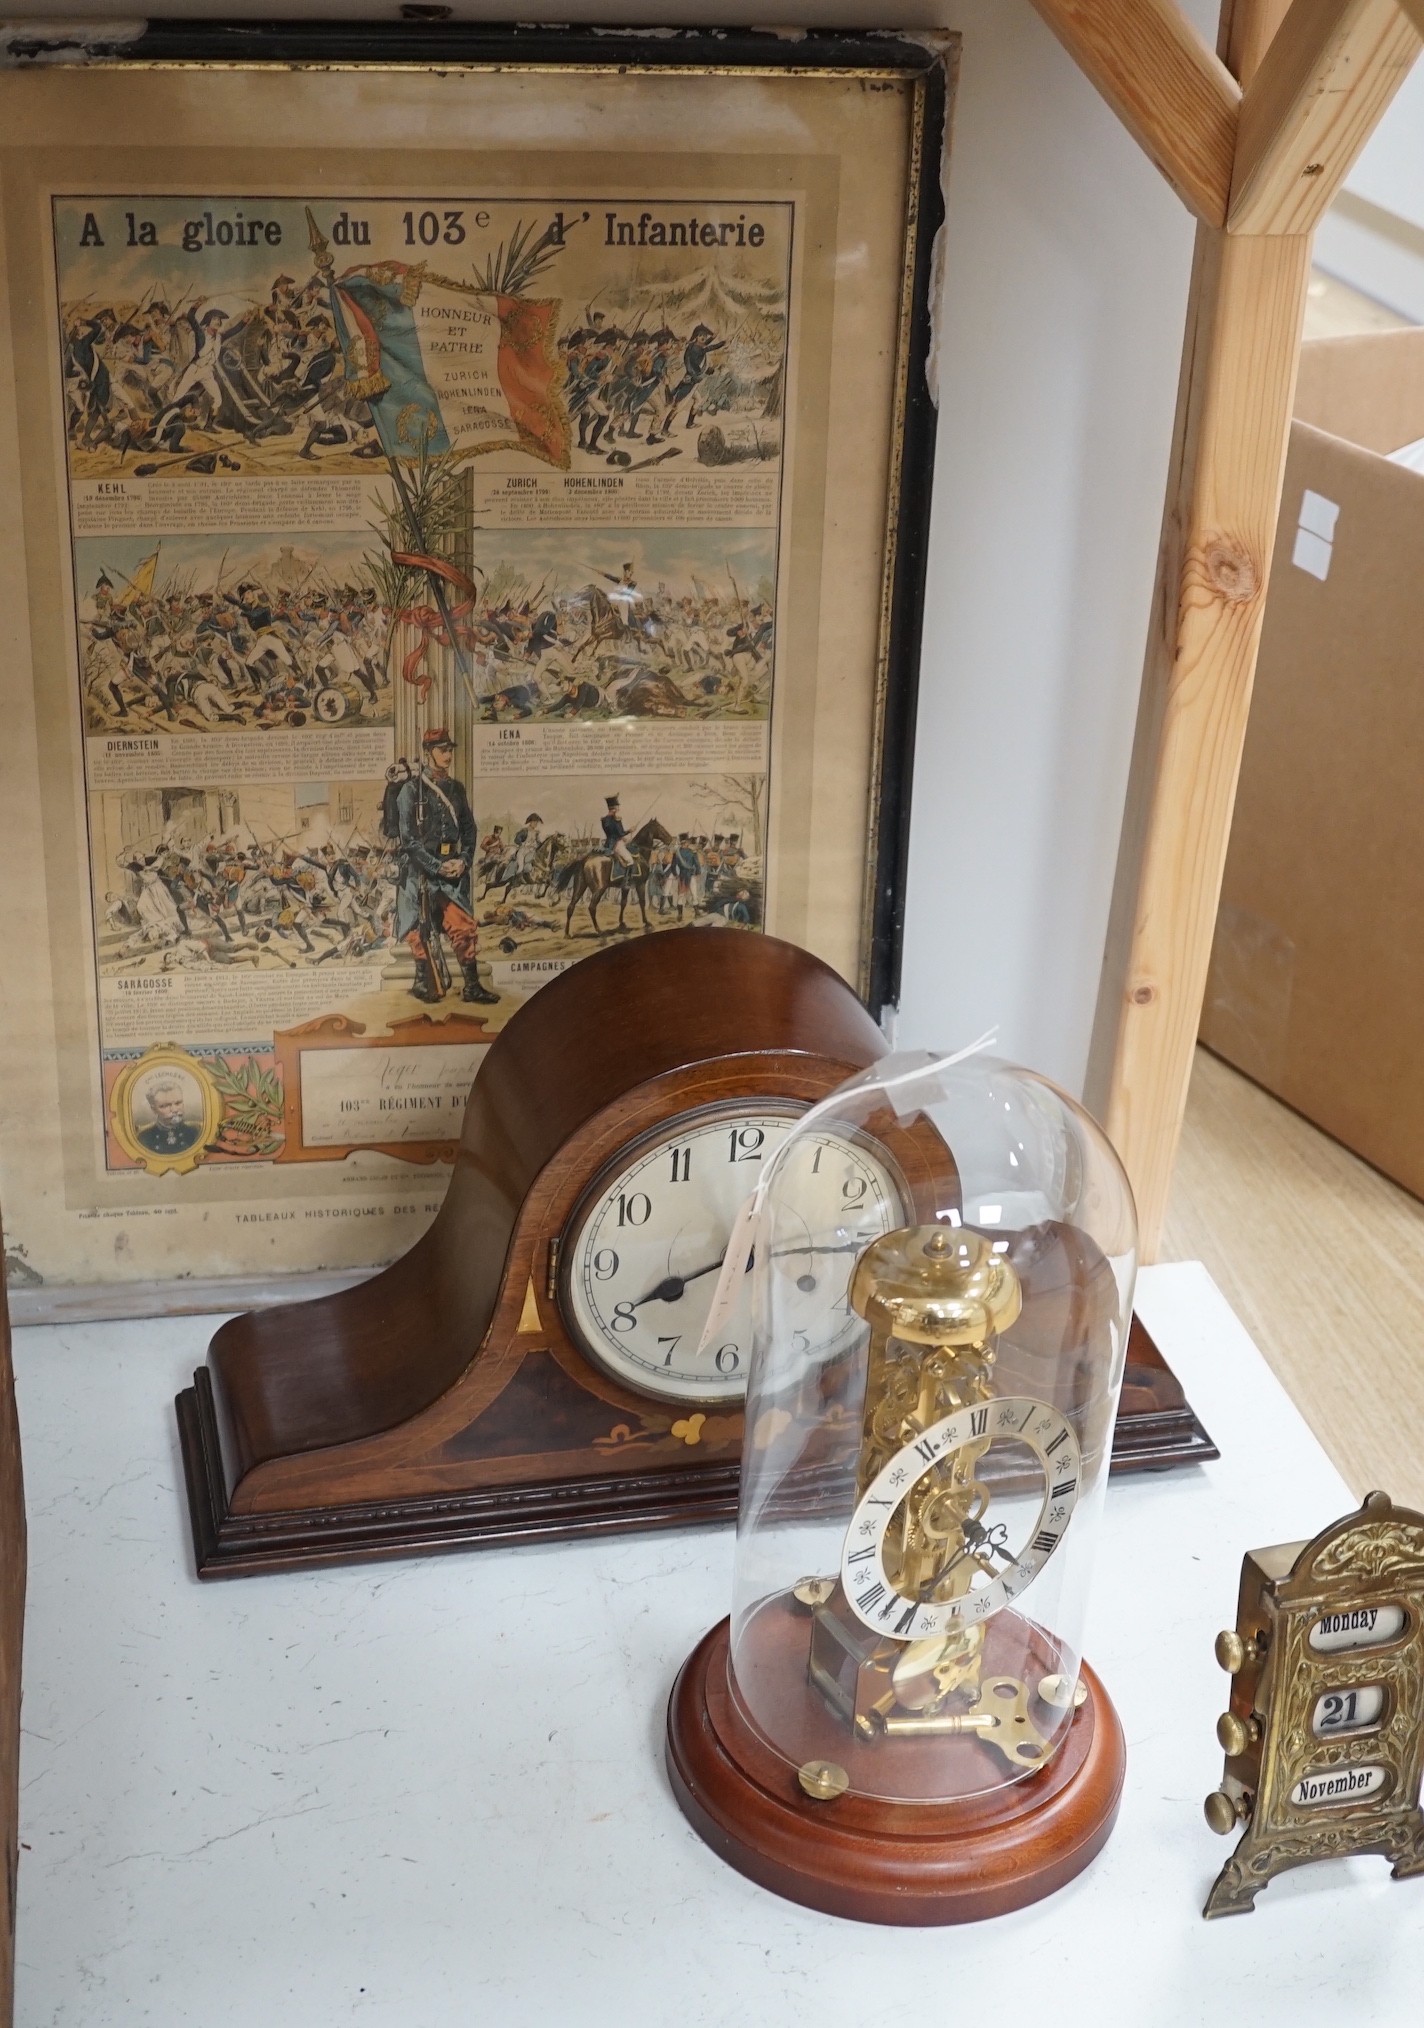 An early 20th century inlaid mahogany mantel clock, a skeleton clock under glass dome, a brass